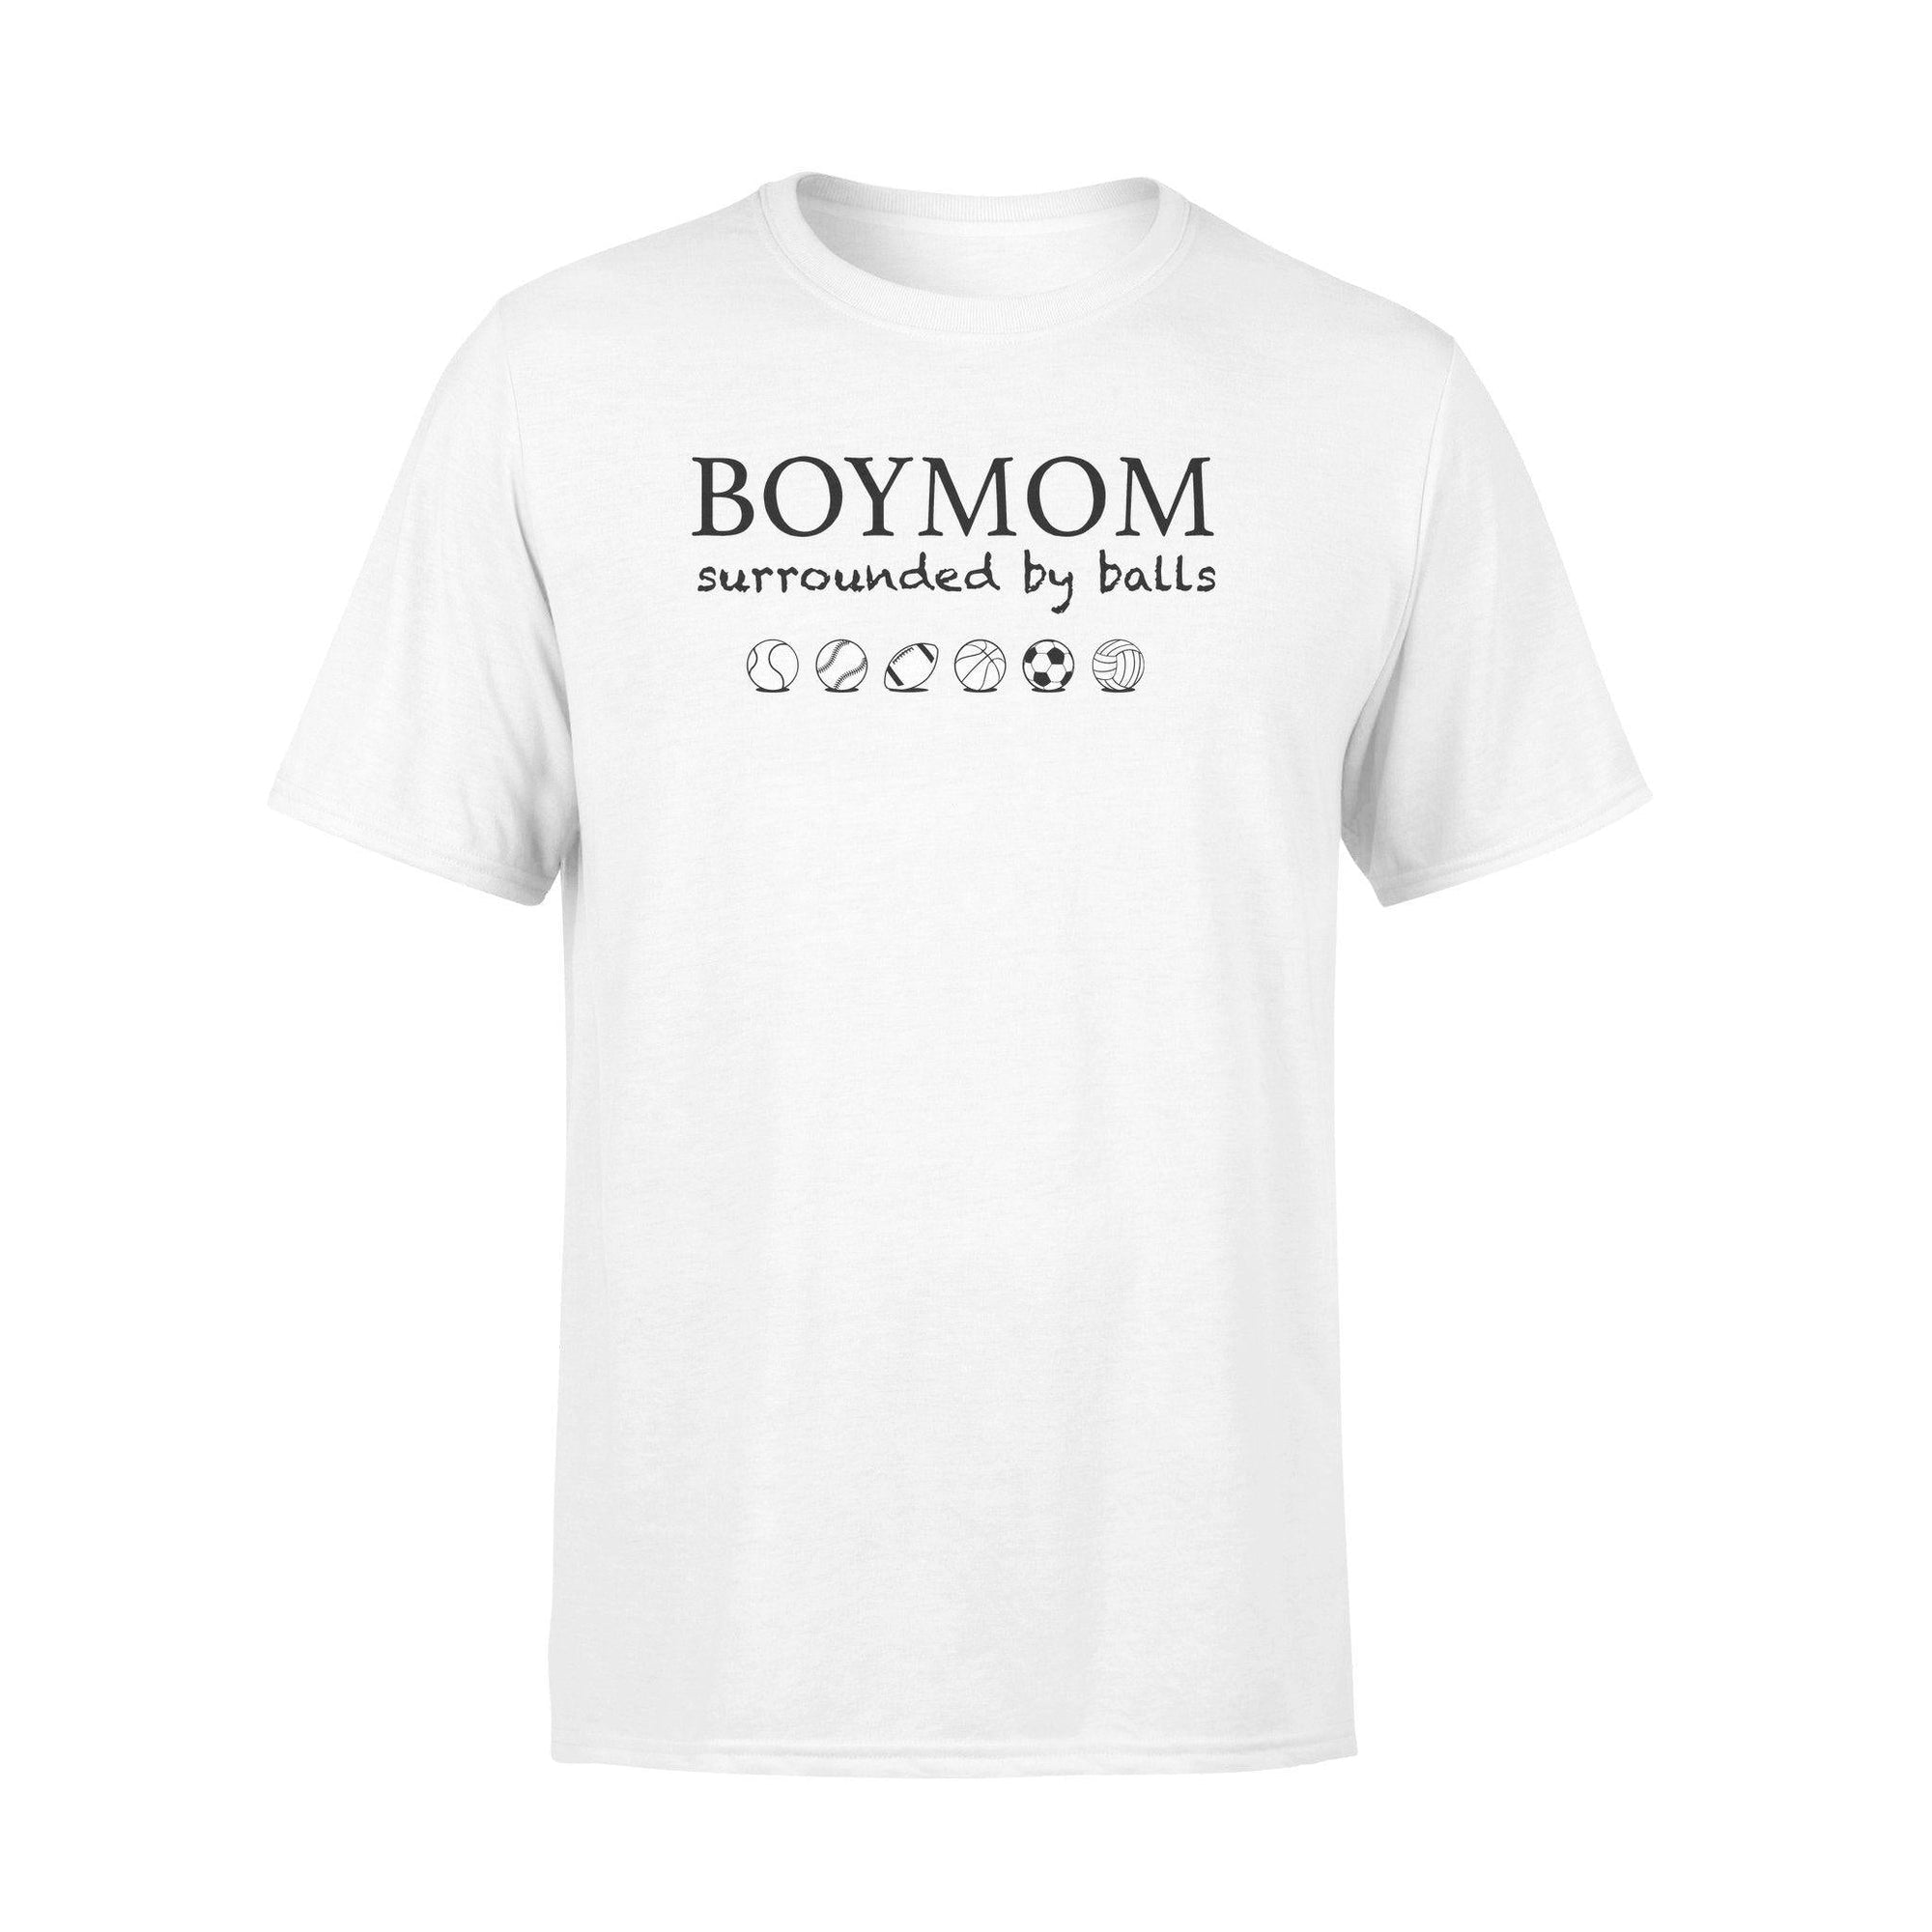 Mom Boy Mom Surrounded By Balls - Standard T-shirt - PERSONAL84